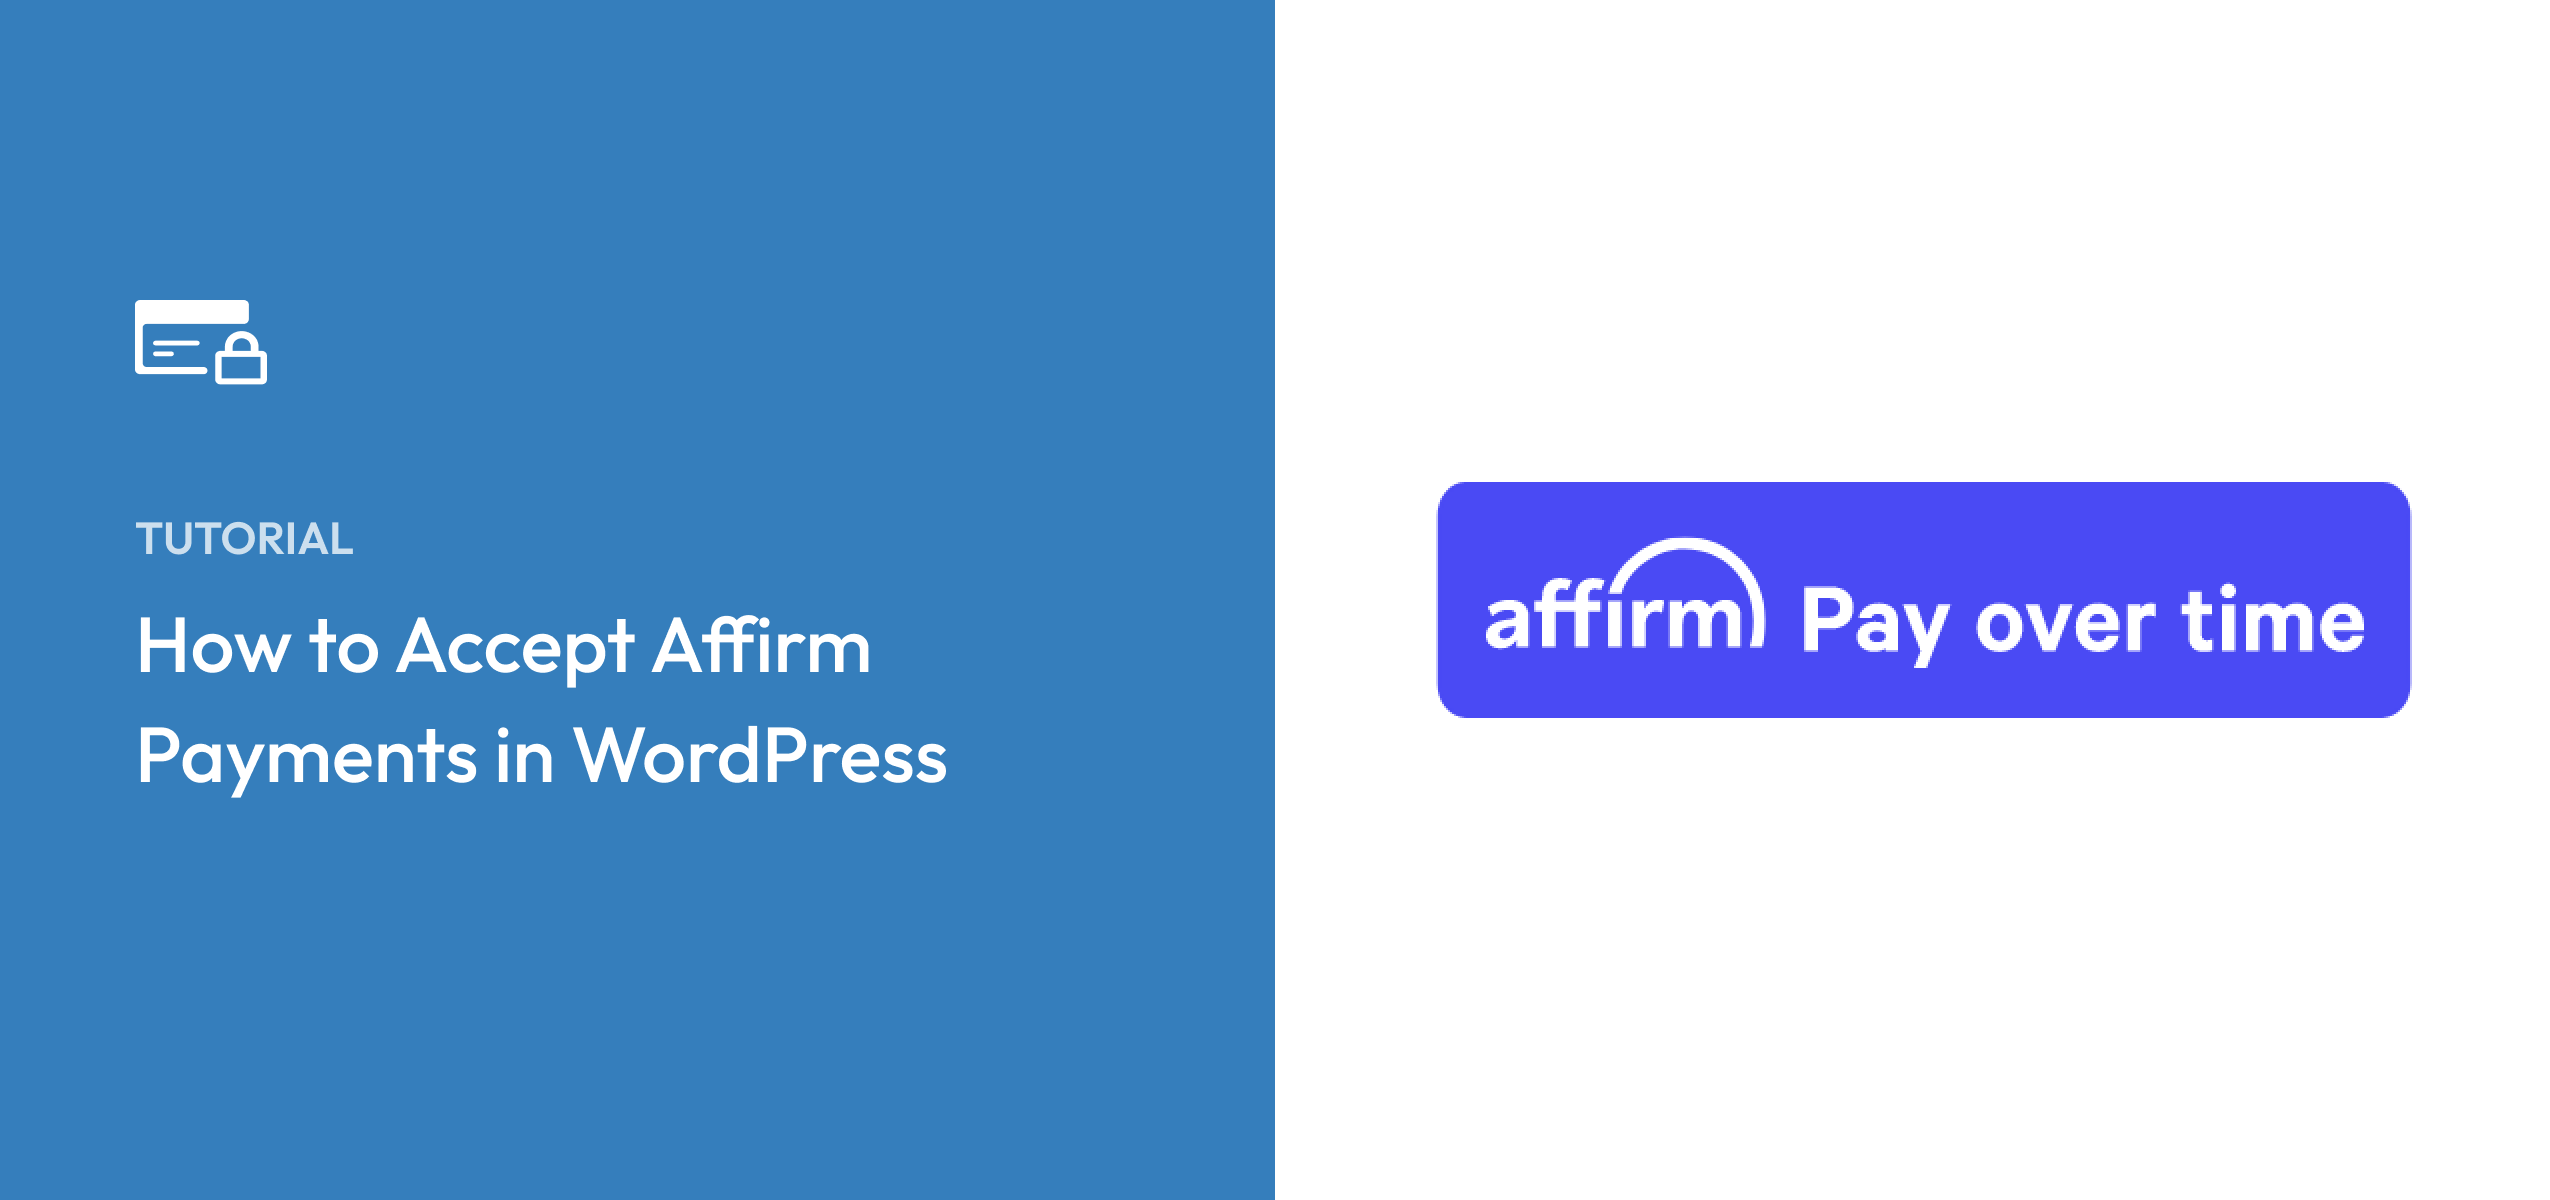 How to Accept Affirm Payments in WordPress